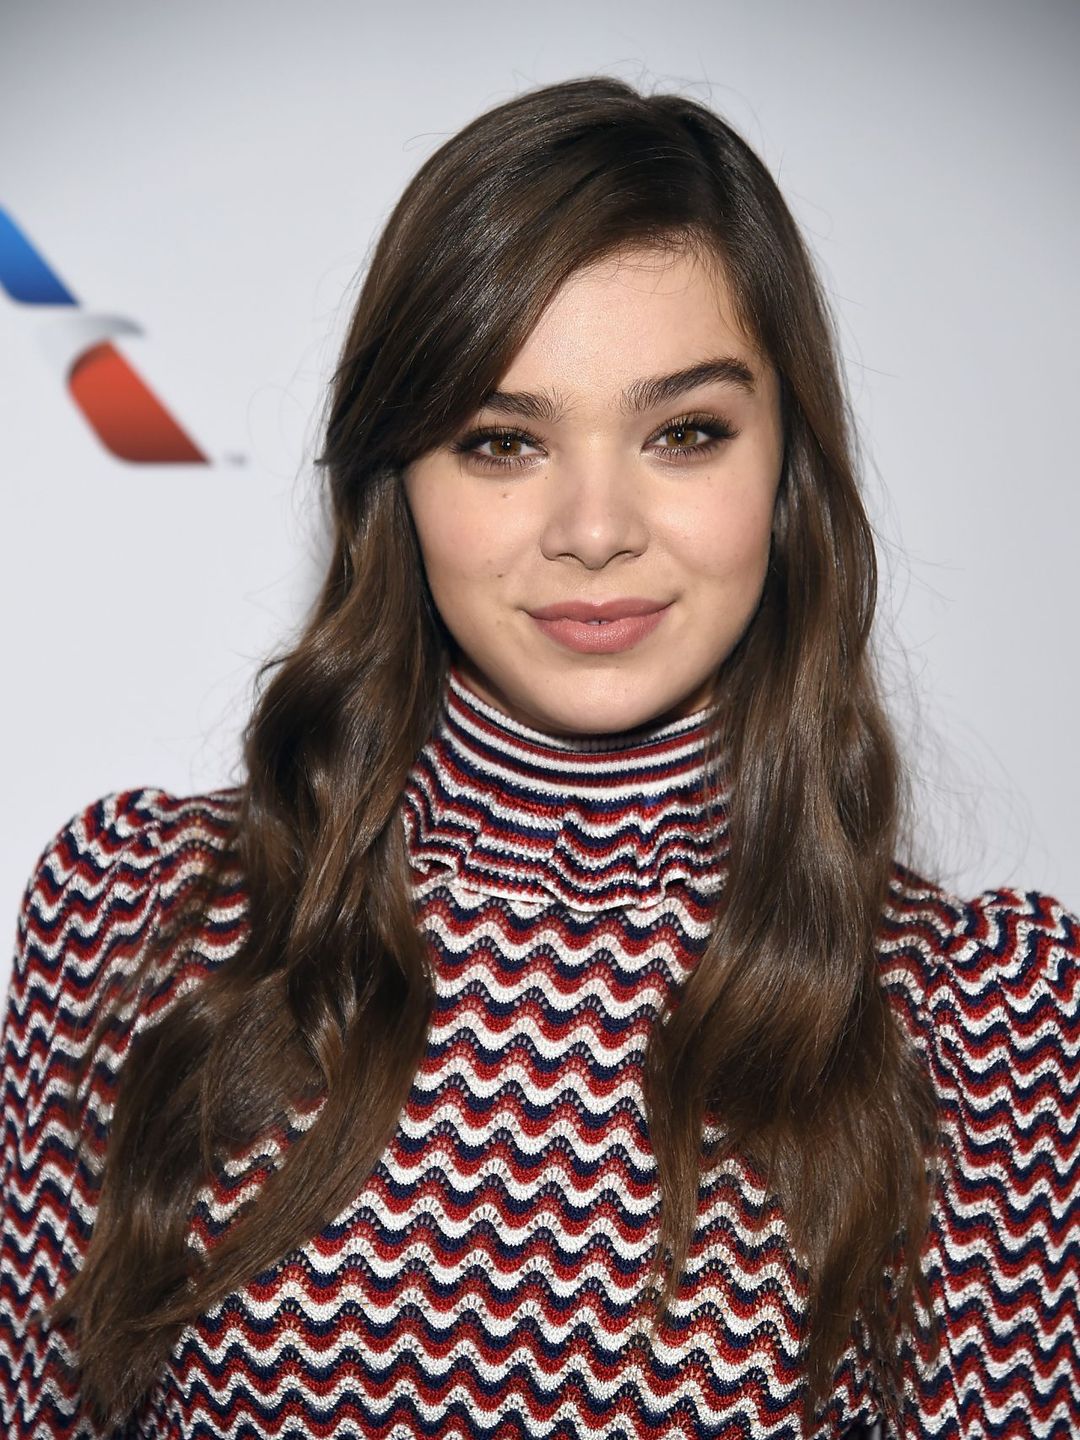 Hailee Steinfeld young age